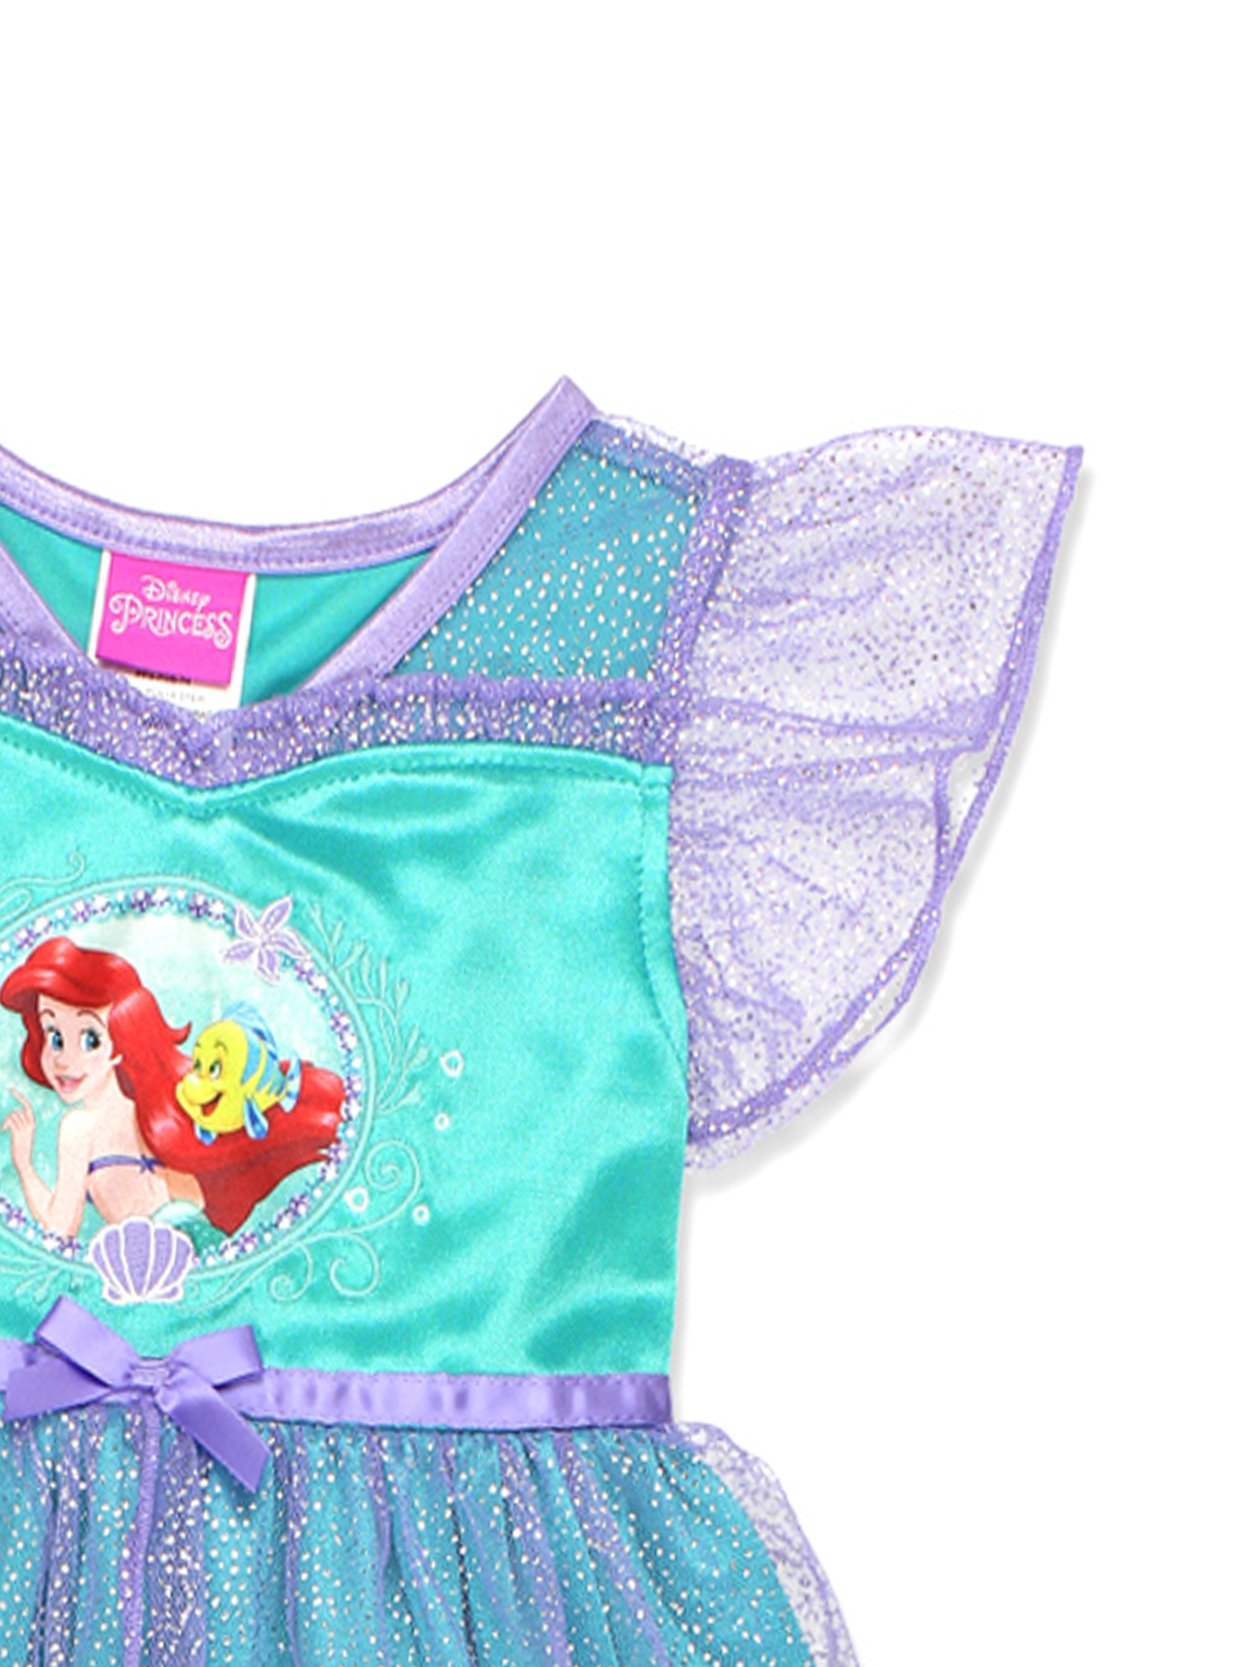 The Little Mermaid Ariel Toddler Girls Fantasy Gown Nightgown Pajamas 21LM165TGS - image 3 of 7